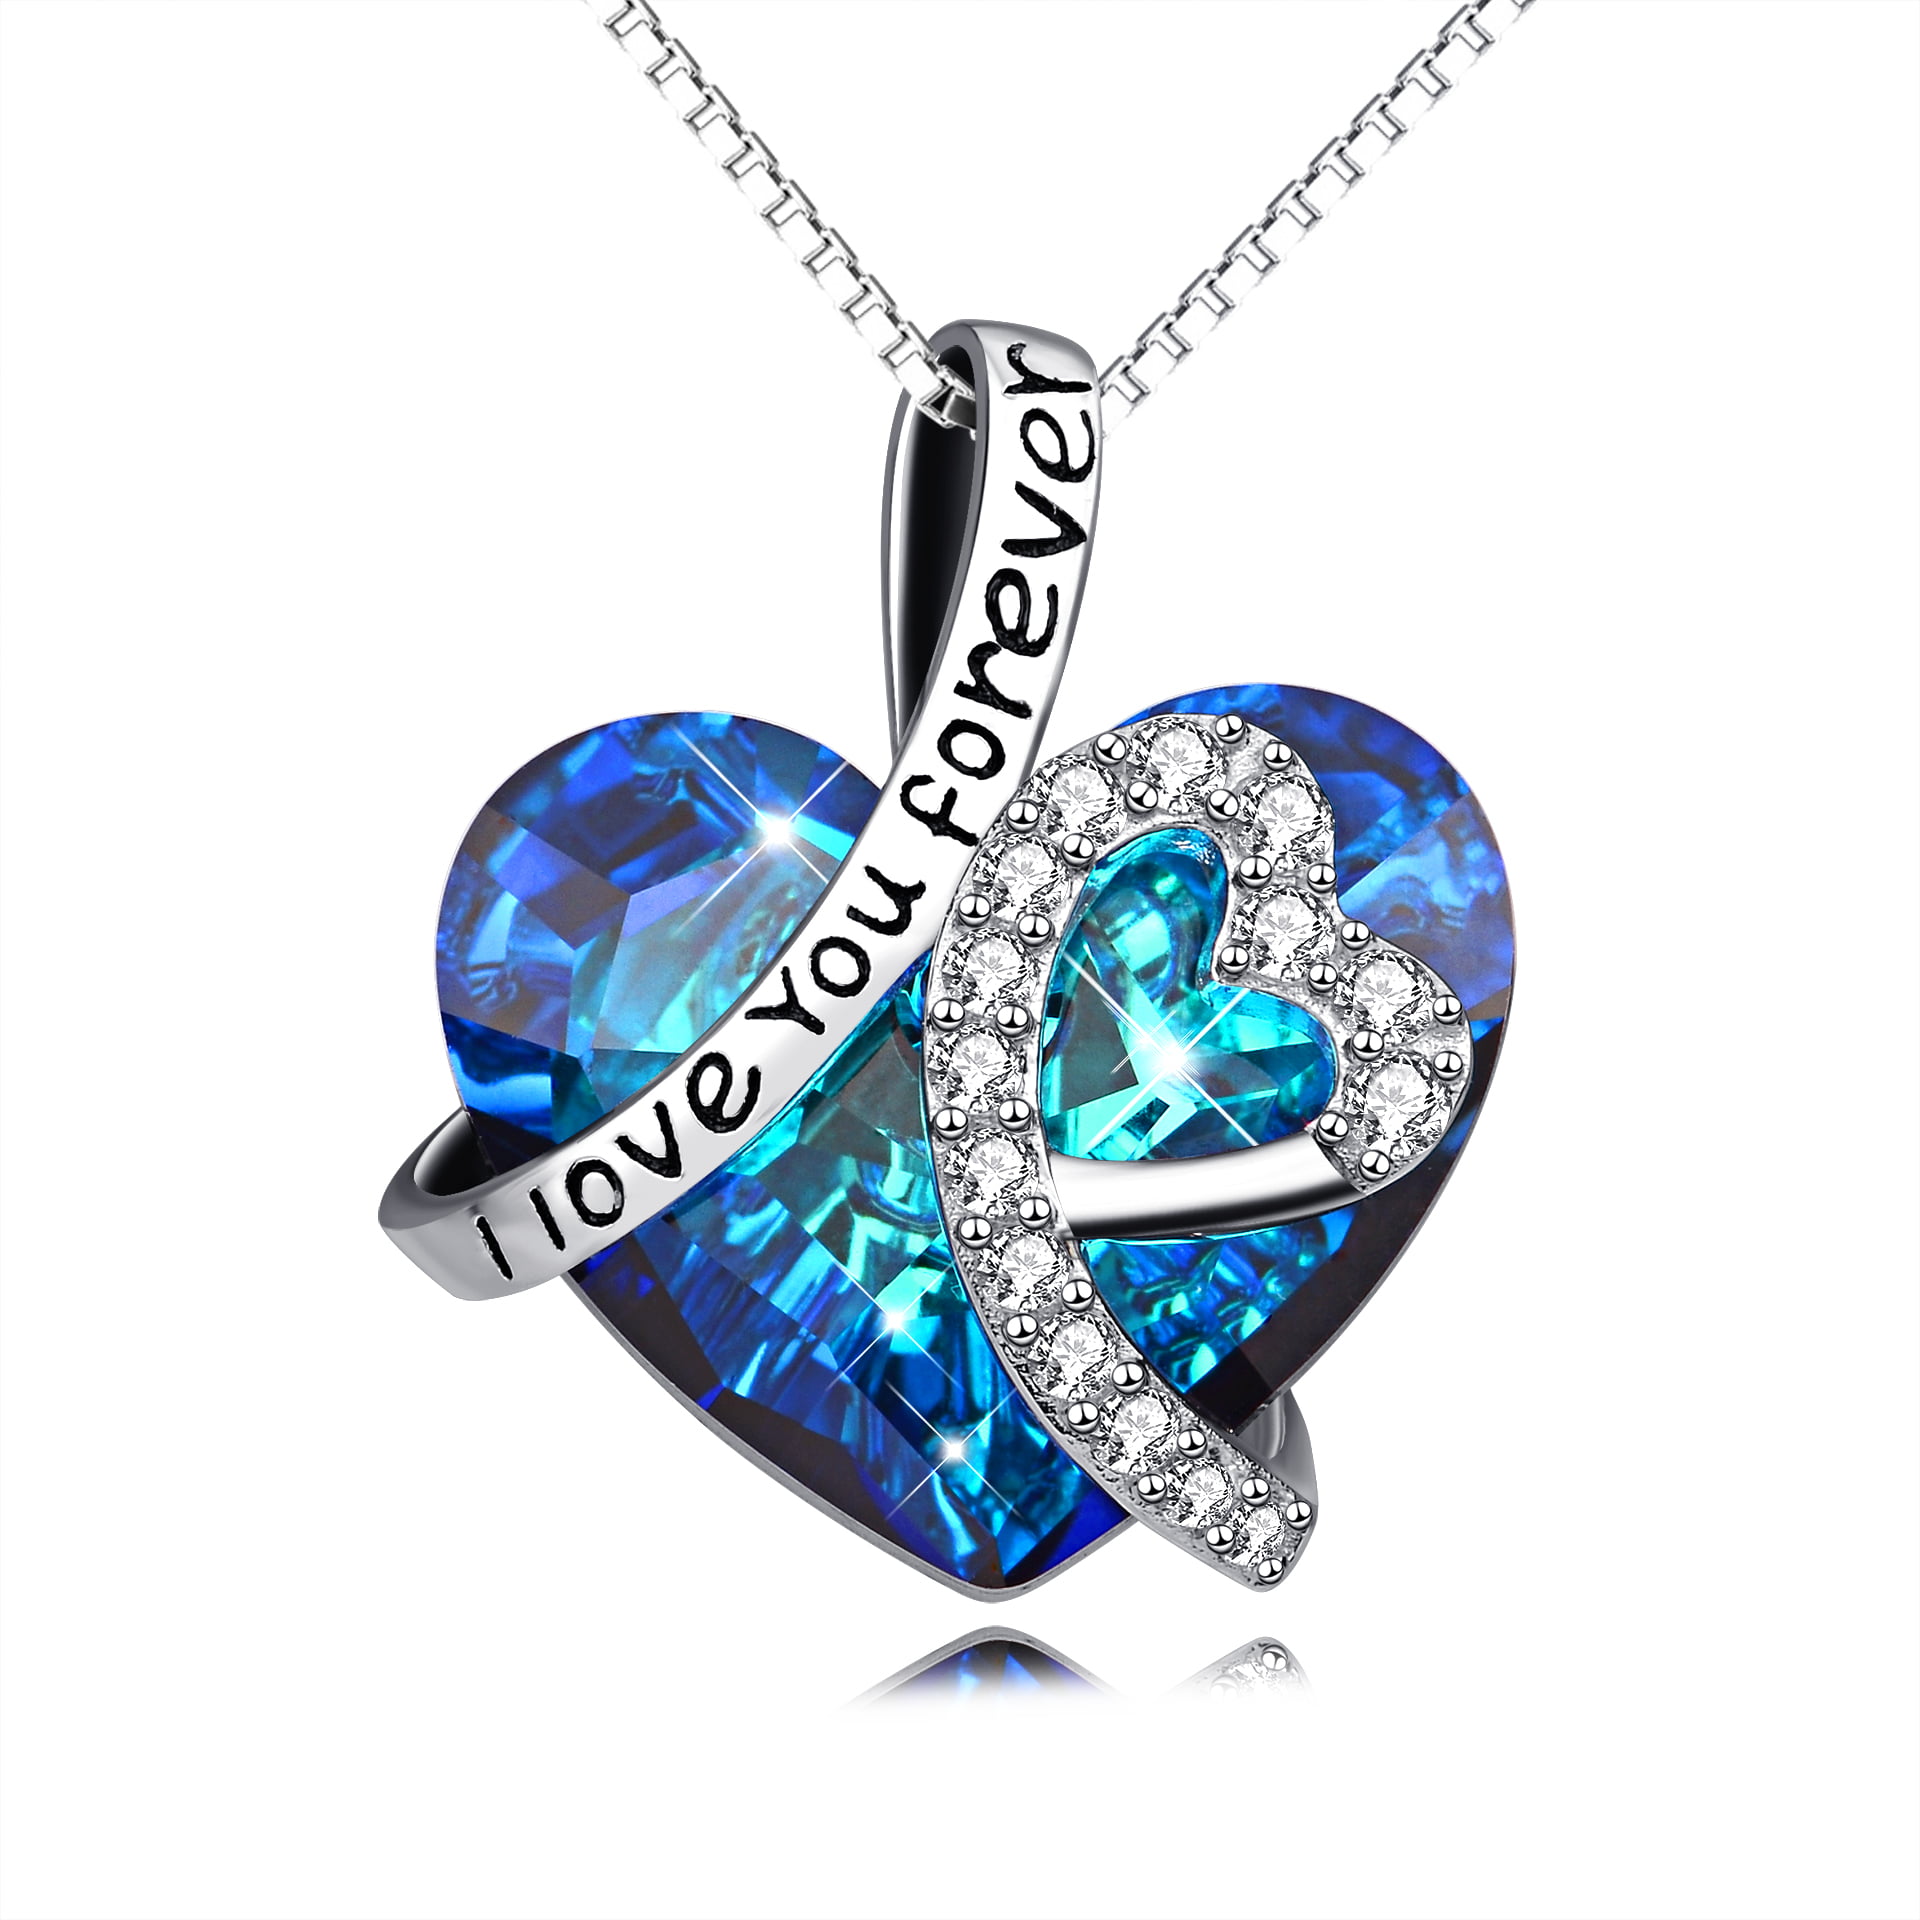 New Women Crystal Love Heart Pendant Silver Plated Chain Choker Necklace Jewelry 